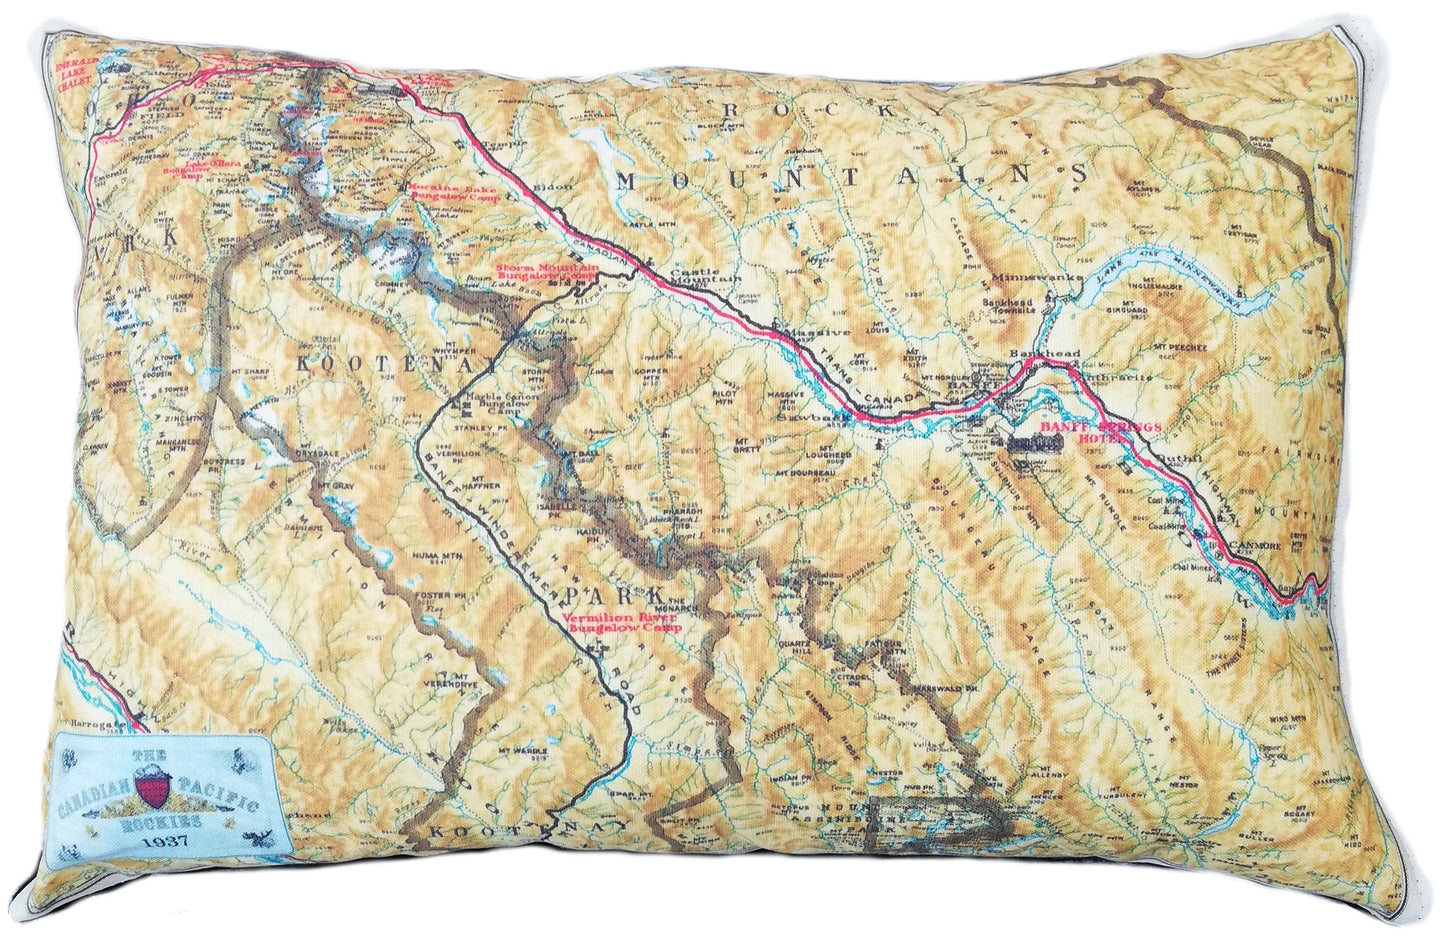 Made in Canada linen pillow case with hand printed vintage road and rail map of the Canadian Pacific Rocky Mountains in Alberta and British Columbia, includes Banff Springs and Jasper National Park.  